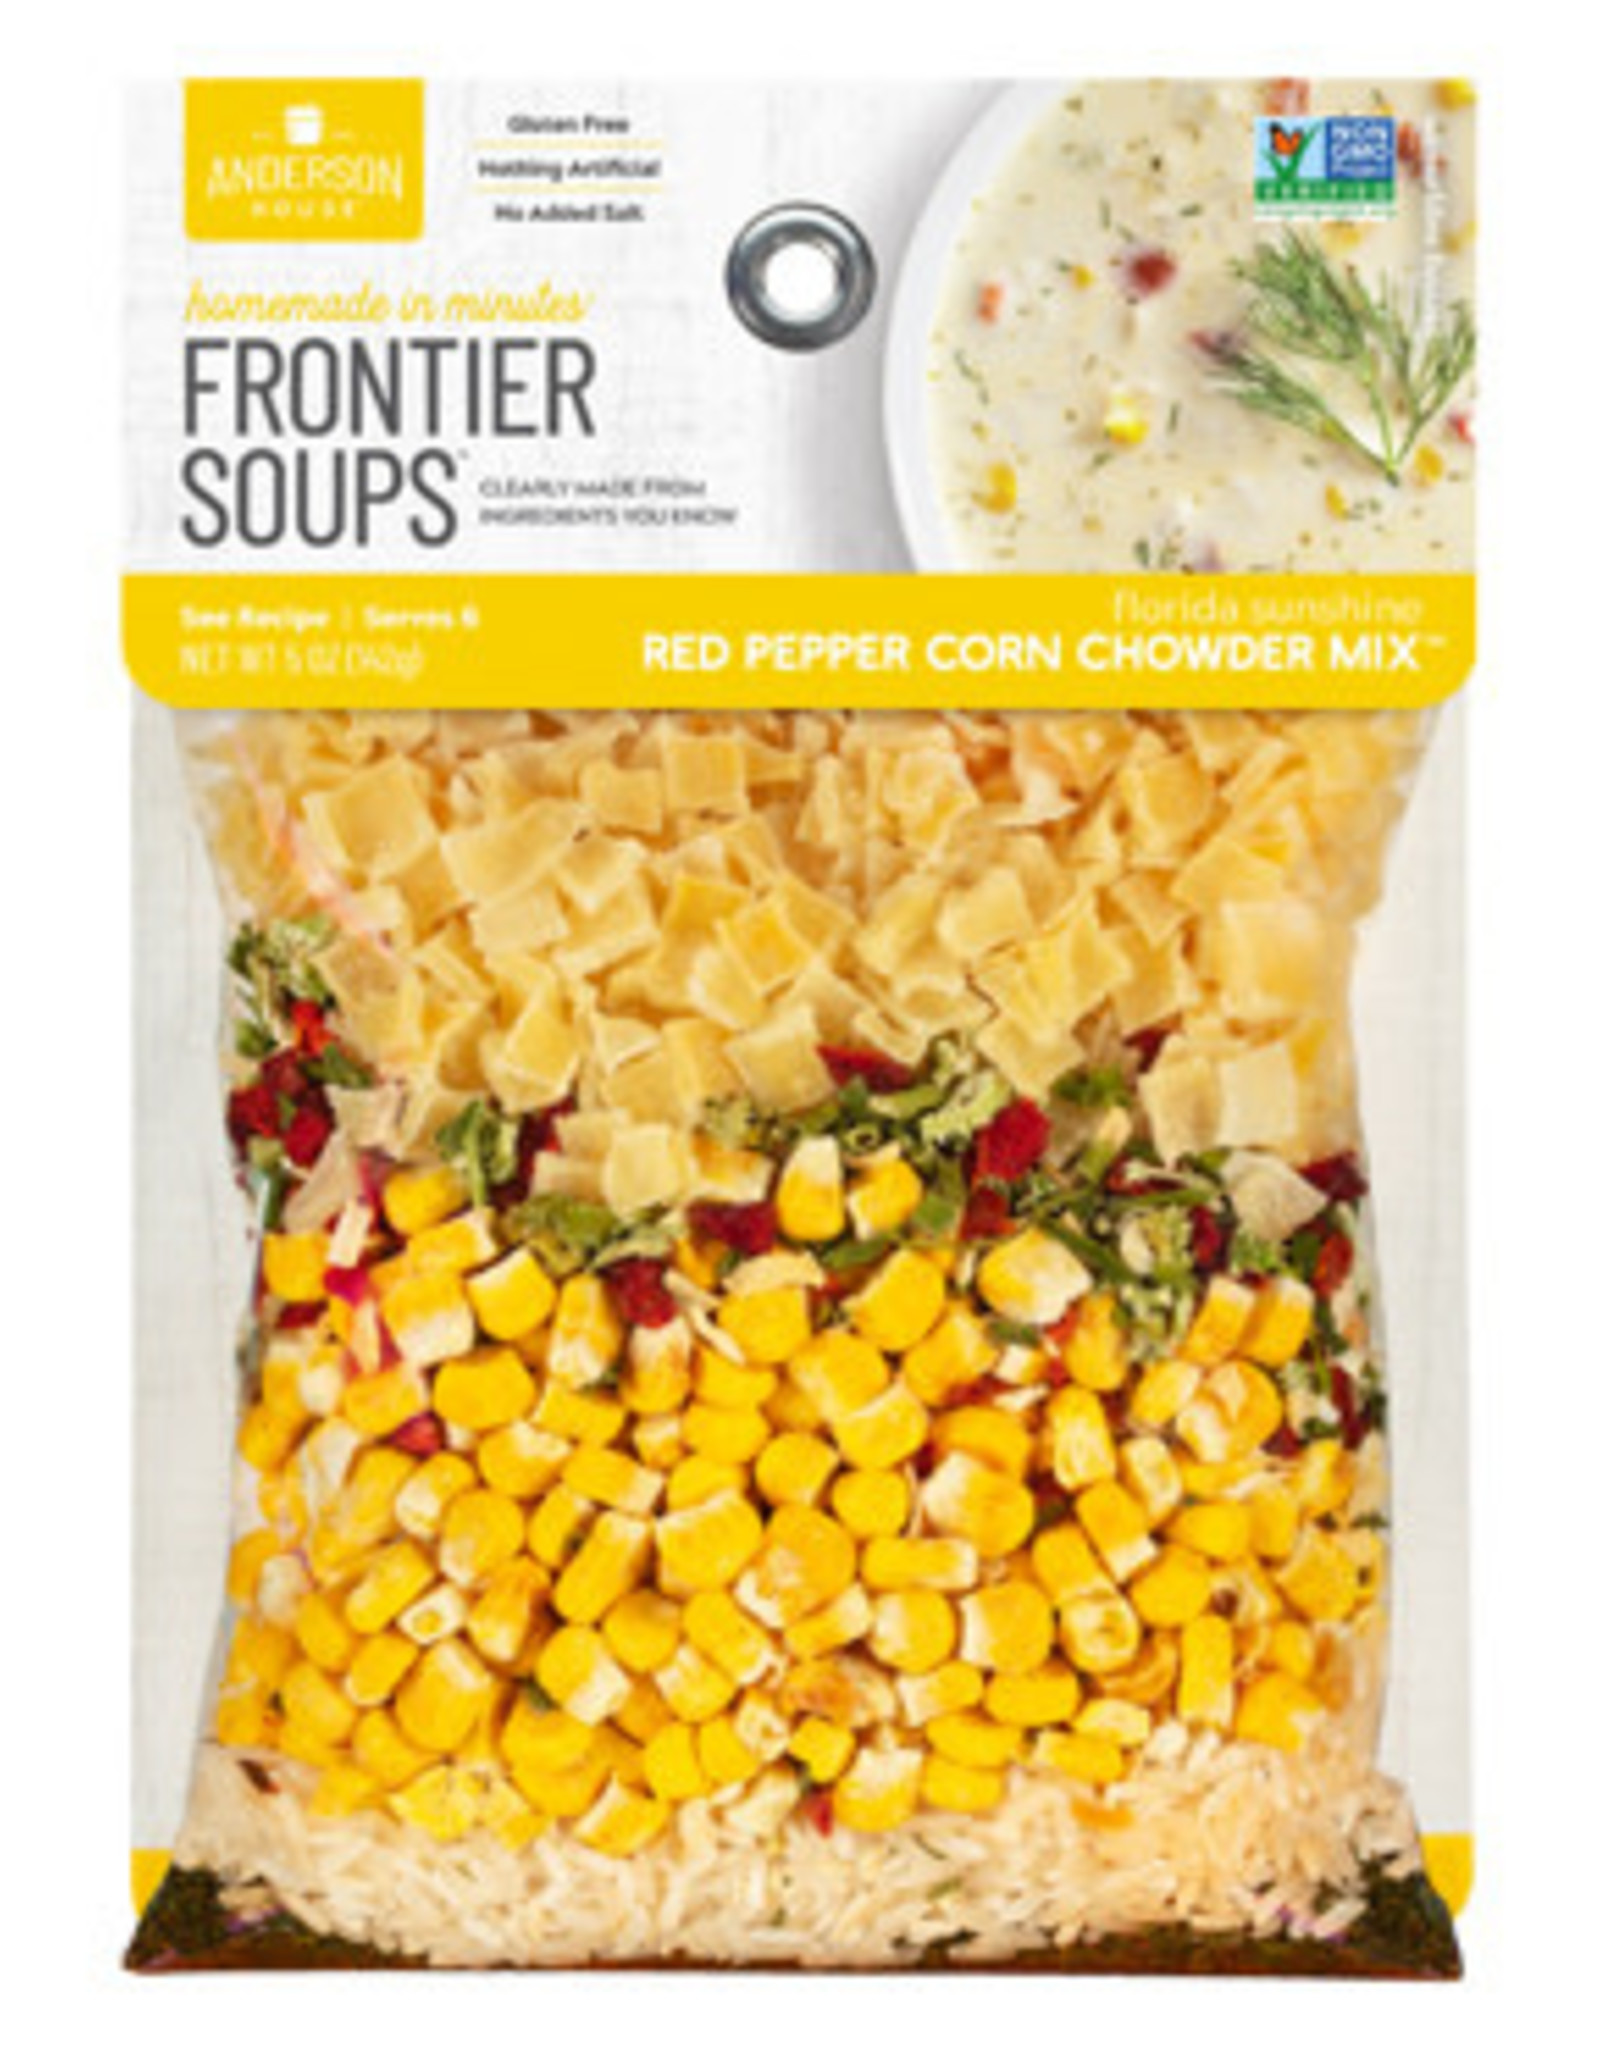 Frontier Soups FLORIDA SUNSHINE RED PEPPER CORN CHOWDER